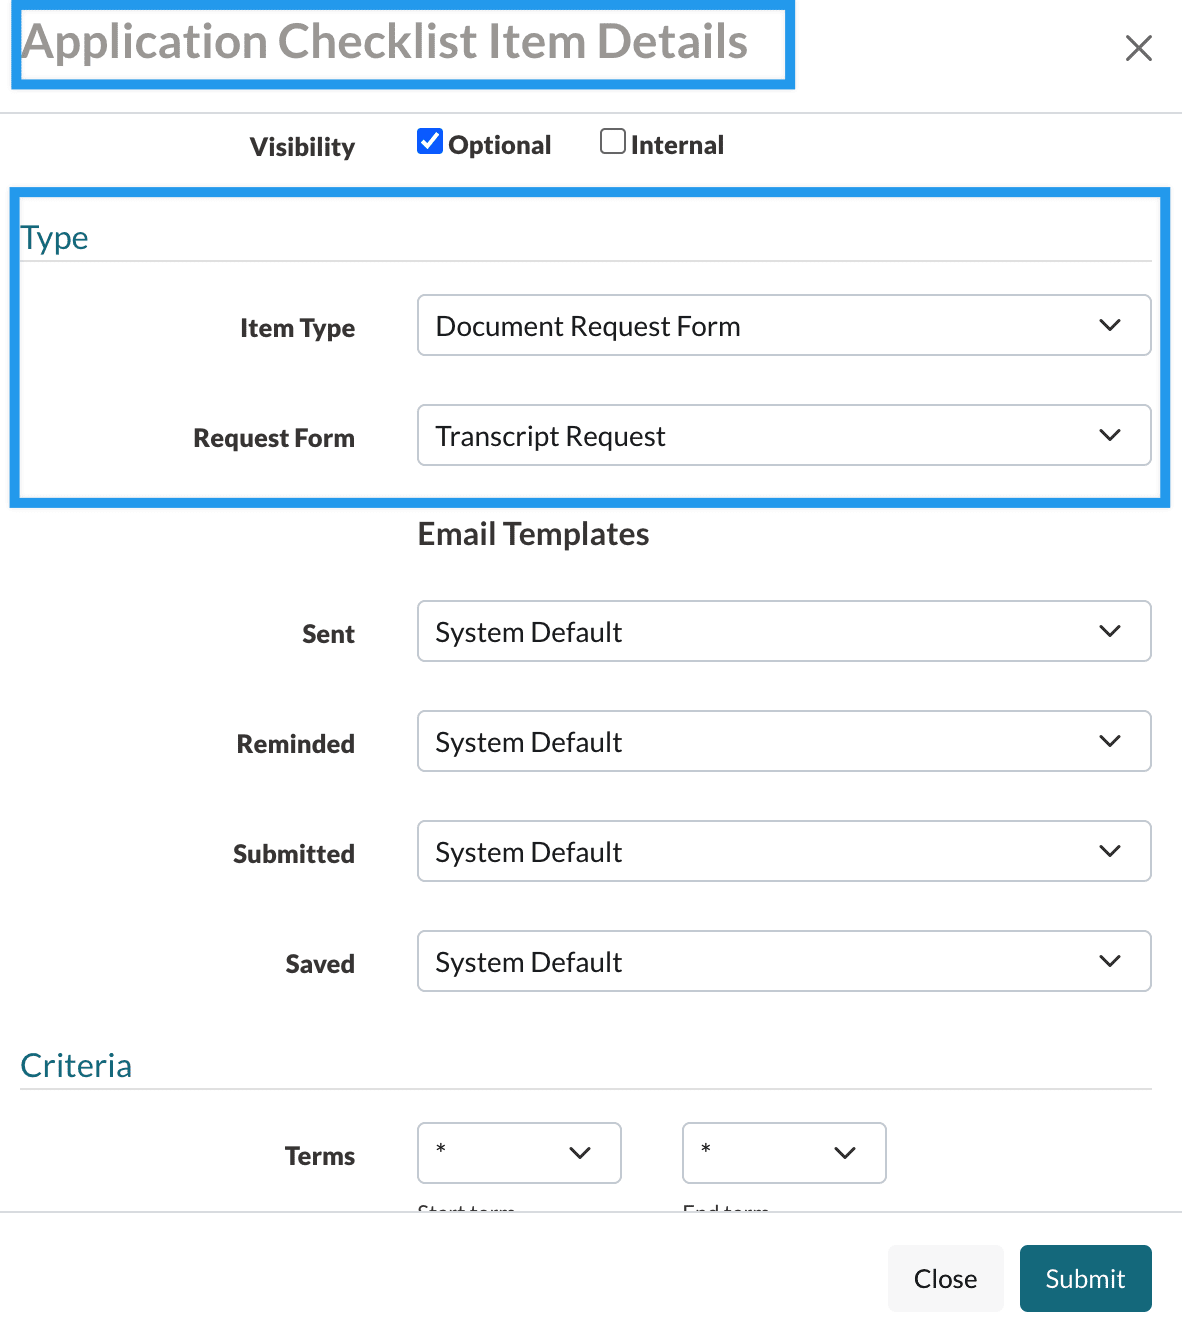 Setting up a Document Request Checklist item.